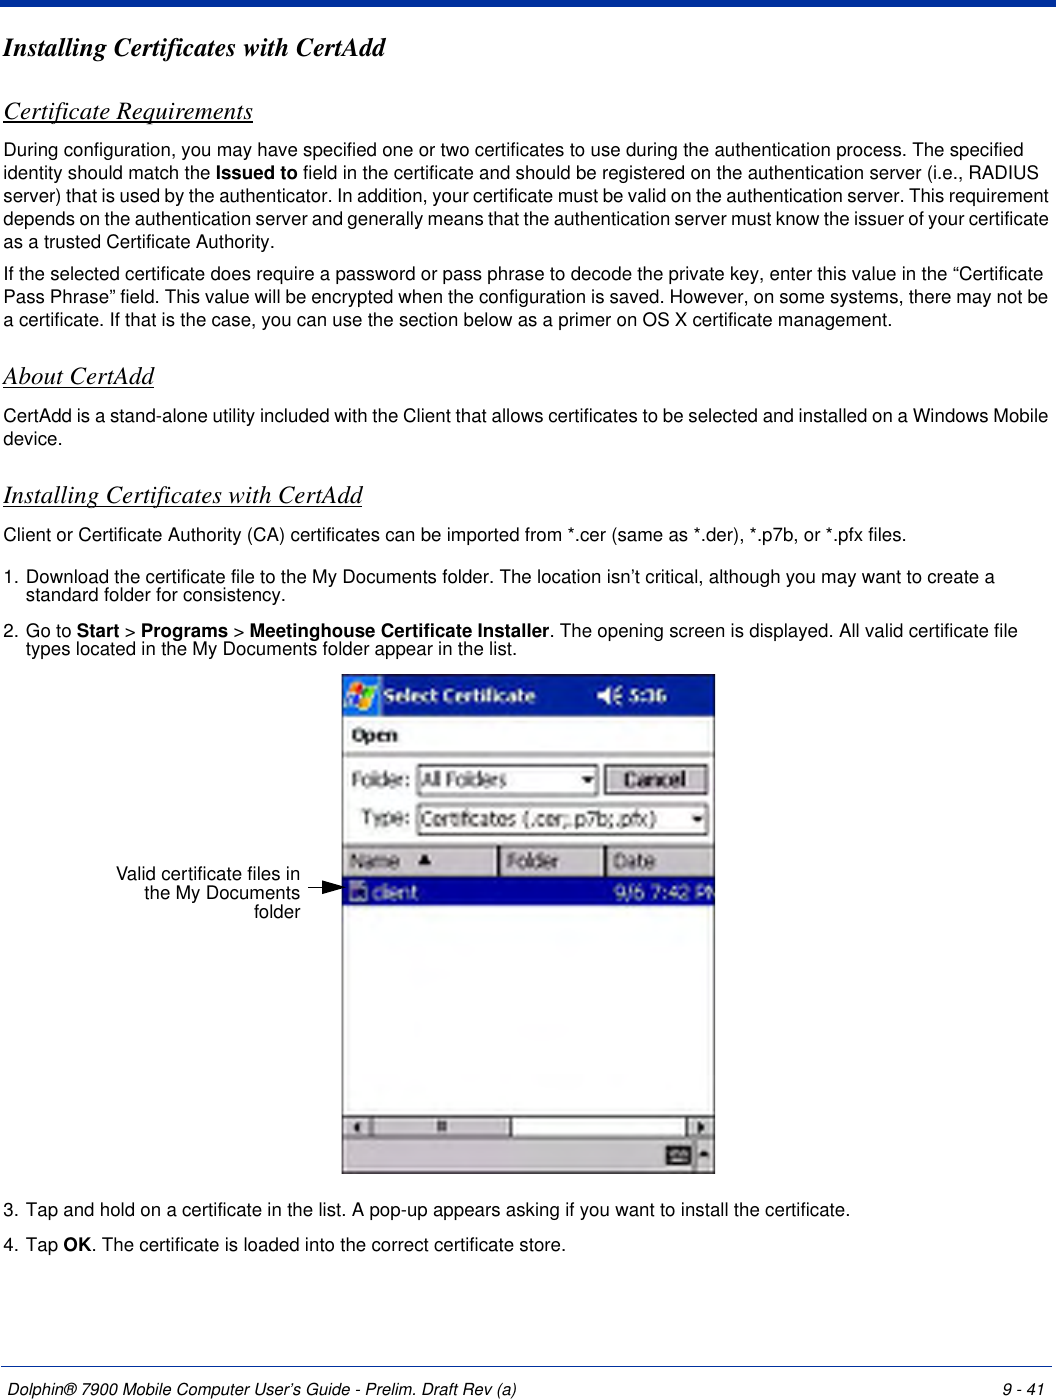 Dolphin® 7900 Mobile Computer User’s Guide - Prelim. Draft Rev (a) 9 - 41Installing Certificates with CertAddCertificate RequirementsDuring configuration, you may have specified one or two certificates to use during the authentication process. The specified identity should match the Issued to field in the certificate and should be registered on the authentication server (i.e., RADIUS server) that is used by the authenticator. In addition, your certificate must be valid on the authentication server. This requirement depends on the authentication server and generally means that the authentication server must know the issuer of your certificate as a trusted Certificate Authority. If the selected certificate does require a password or pass phrase to decode the private key, enter this value in the “Certificate Pass Phrase” field. This value will be encrypted when the configuration is saved. However, on some systems, there may not be a certificate. If that is the case, you can use the section below as a primer on OS X certificate management.About CertAddCertAdd is a stand-alone utility included with the Client that allows certificates to be selected and installed on a Windows Mobile device.   Installing Certificates with CertAddClient or Certificate Authority (CA) certificates can be imported from *.cer (same as *.der), *.p7b, or *.pfx files.1. Download the certificate file to the My Documents folder. The location isn’t critical, although you may want to create a standard folder for consistency.2. Go to Start &gt; Programs &gt; Meetinghouse Certificate Installer. The opening screen is displayed. All valid certificate file types located in the My Documents folder appear in the list. 3. Tap and hold on a certificate in the list. A pop-up appears asking if you want to install the certificate.4. Tap OK. The certificate is loaded into the correct certificate store.Valid certificate files in the My Documents folder 